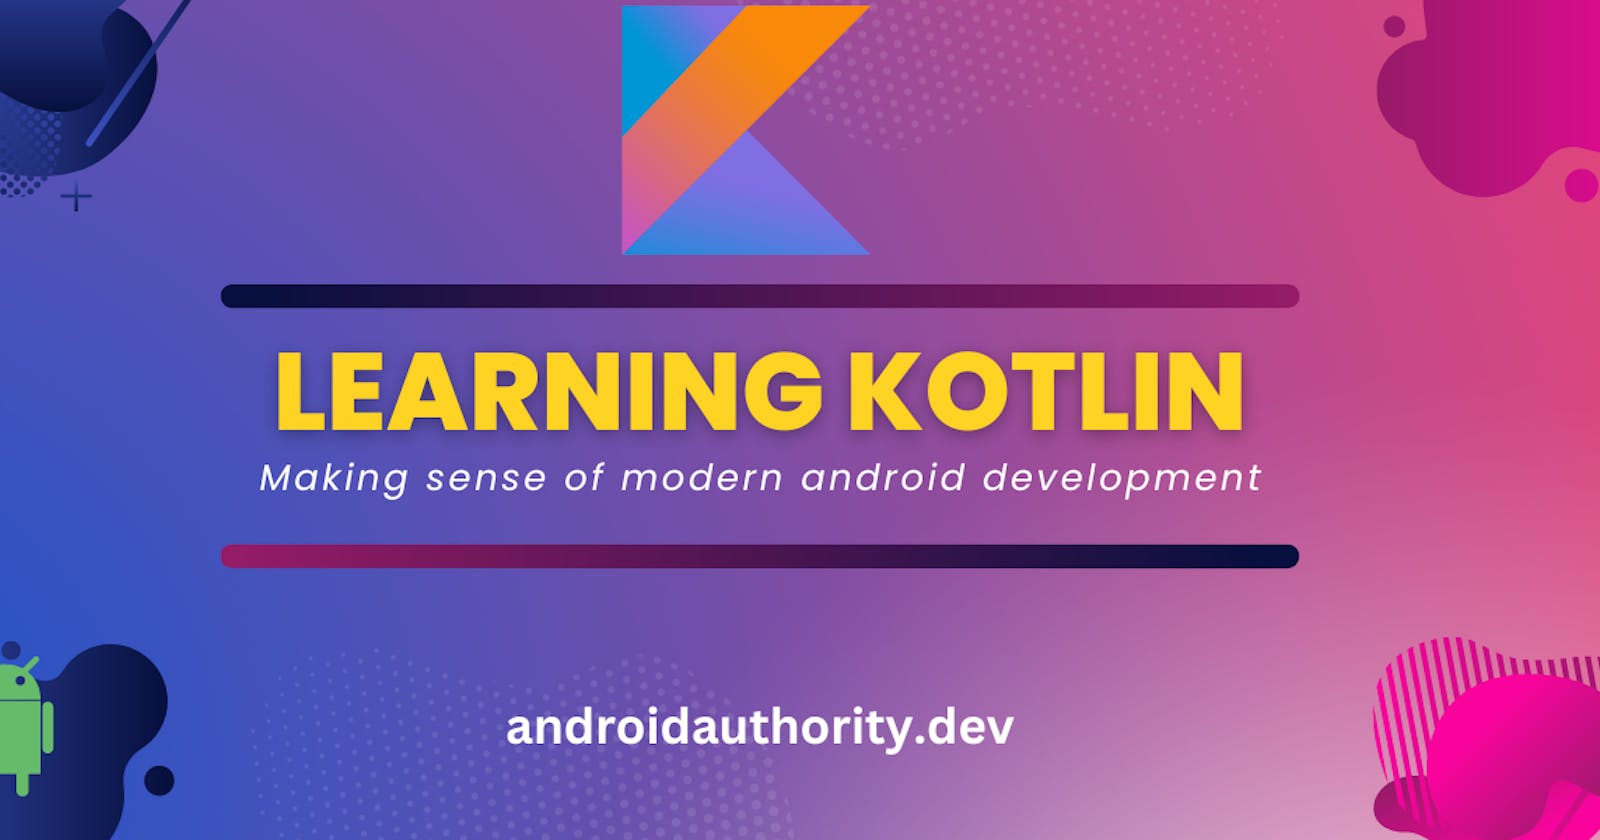 Quickly learning Kotlin for Android development